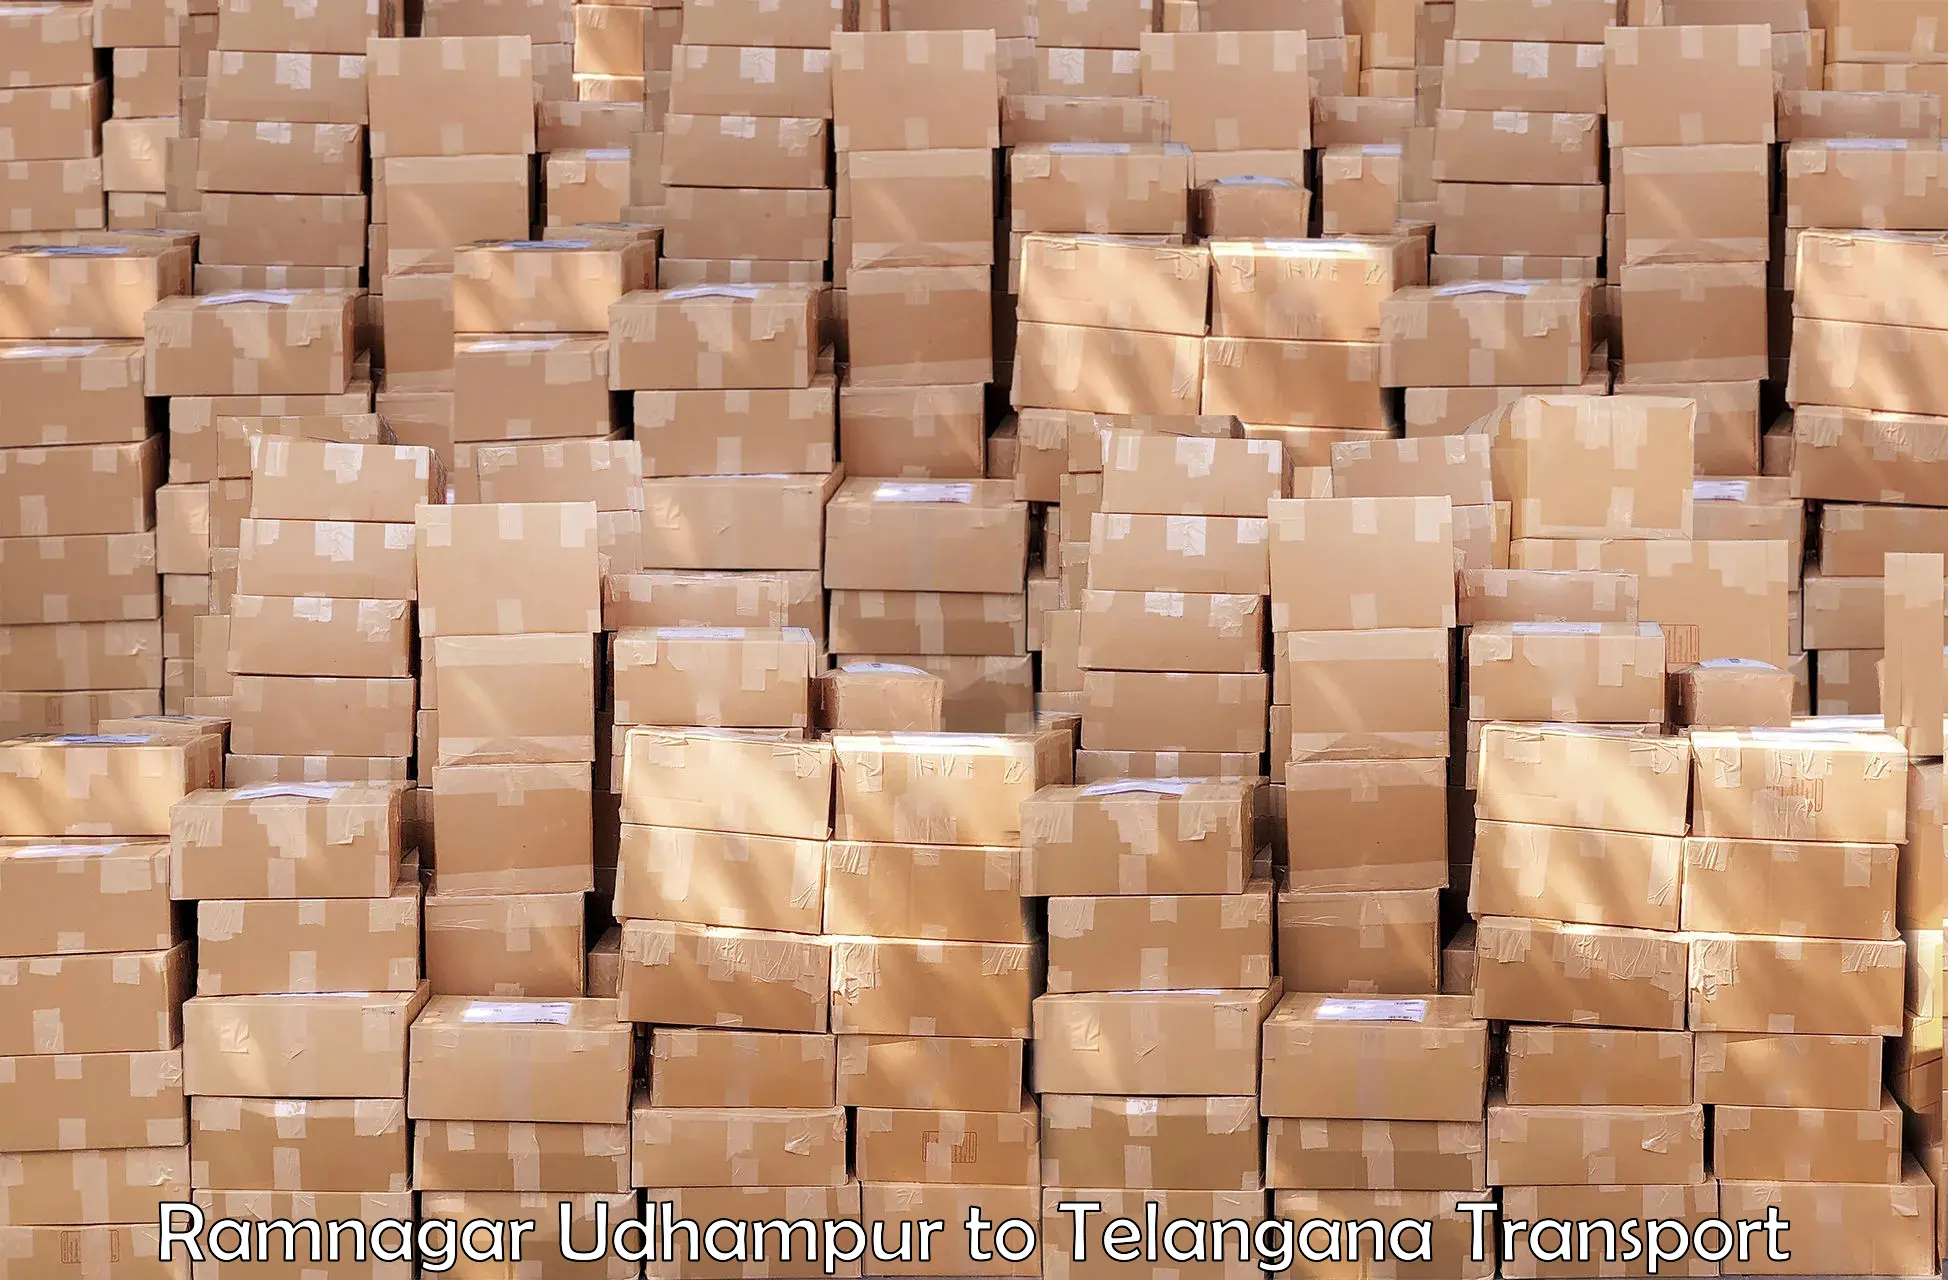 Daily parcel service transport Ramnagar Udhampur to Husnabad